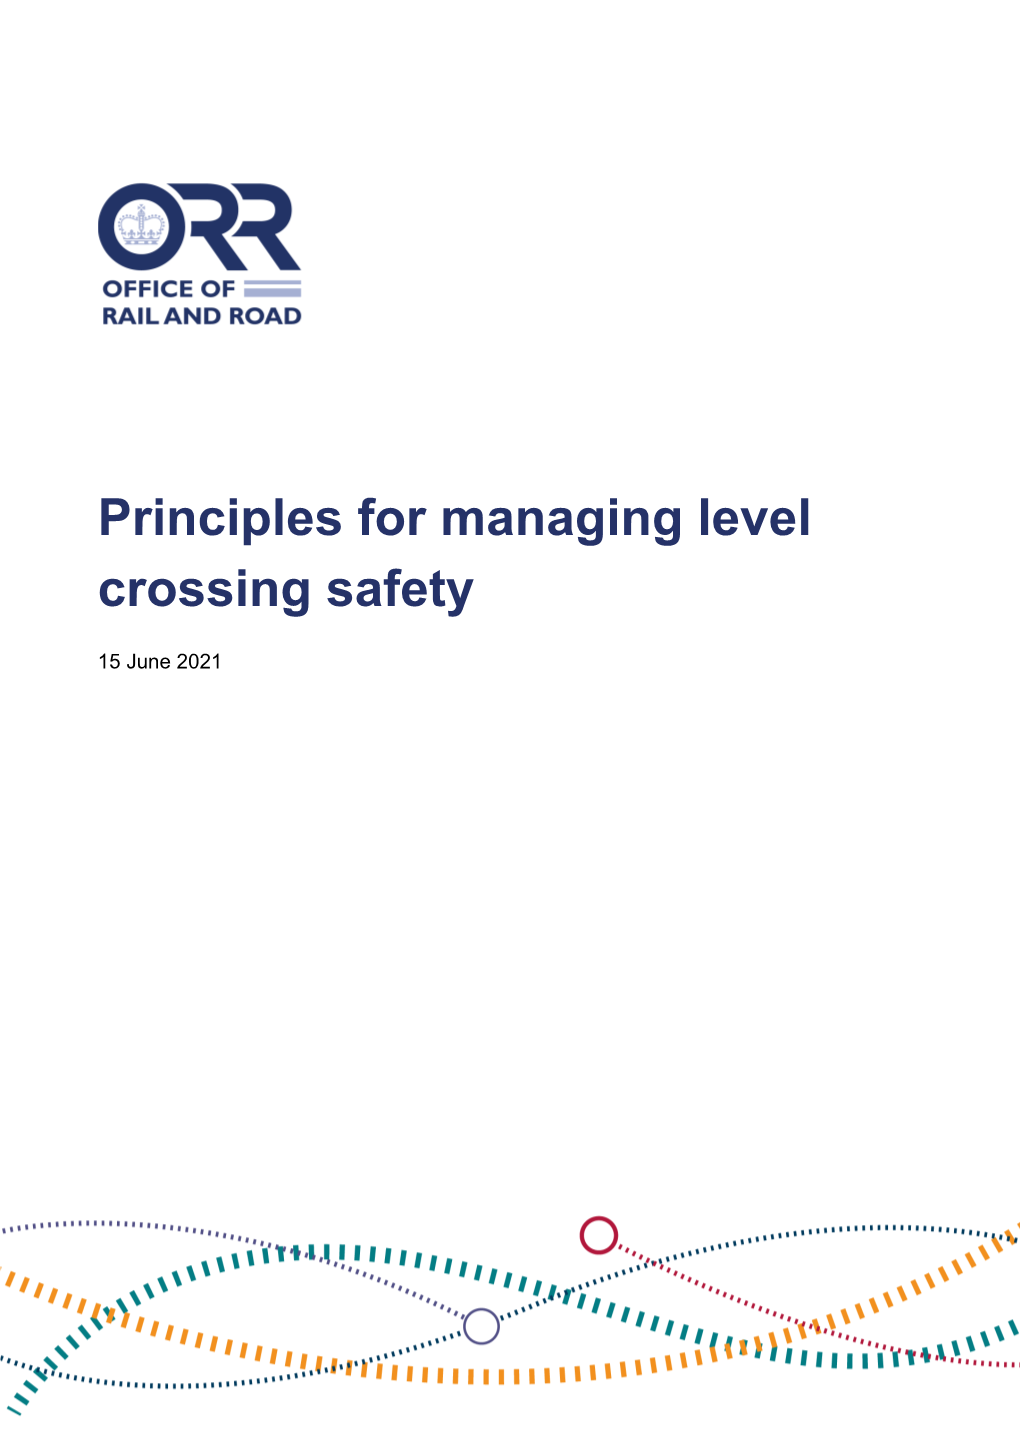 Principles for Managing Level Crossing Safety